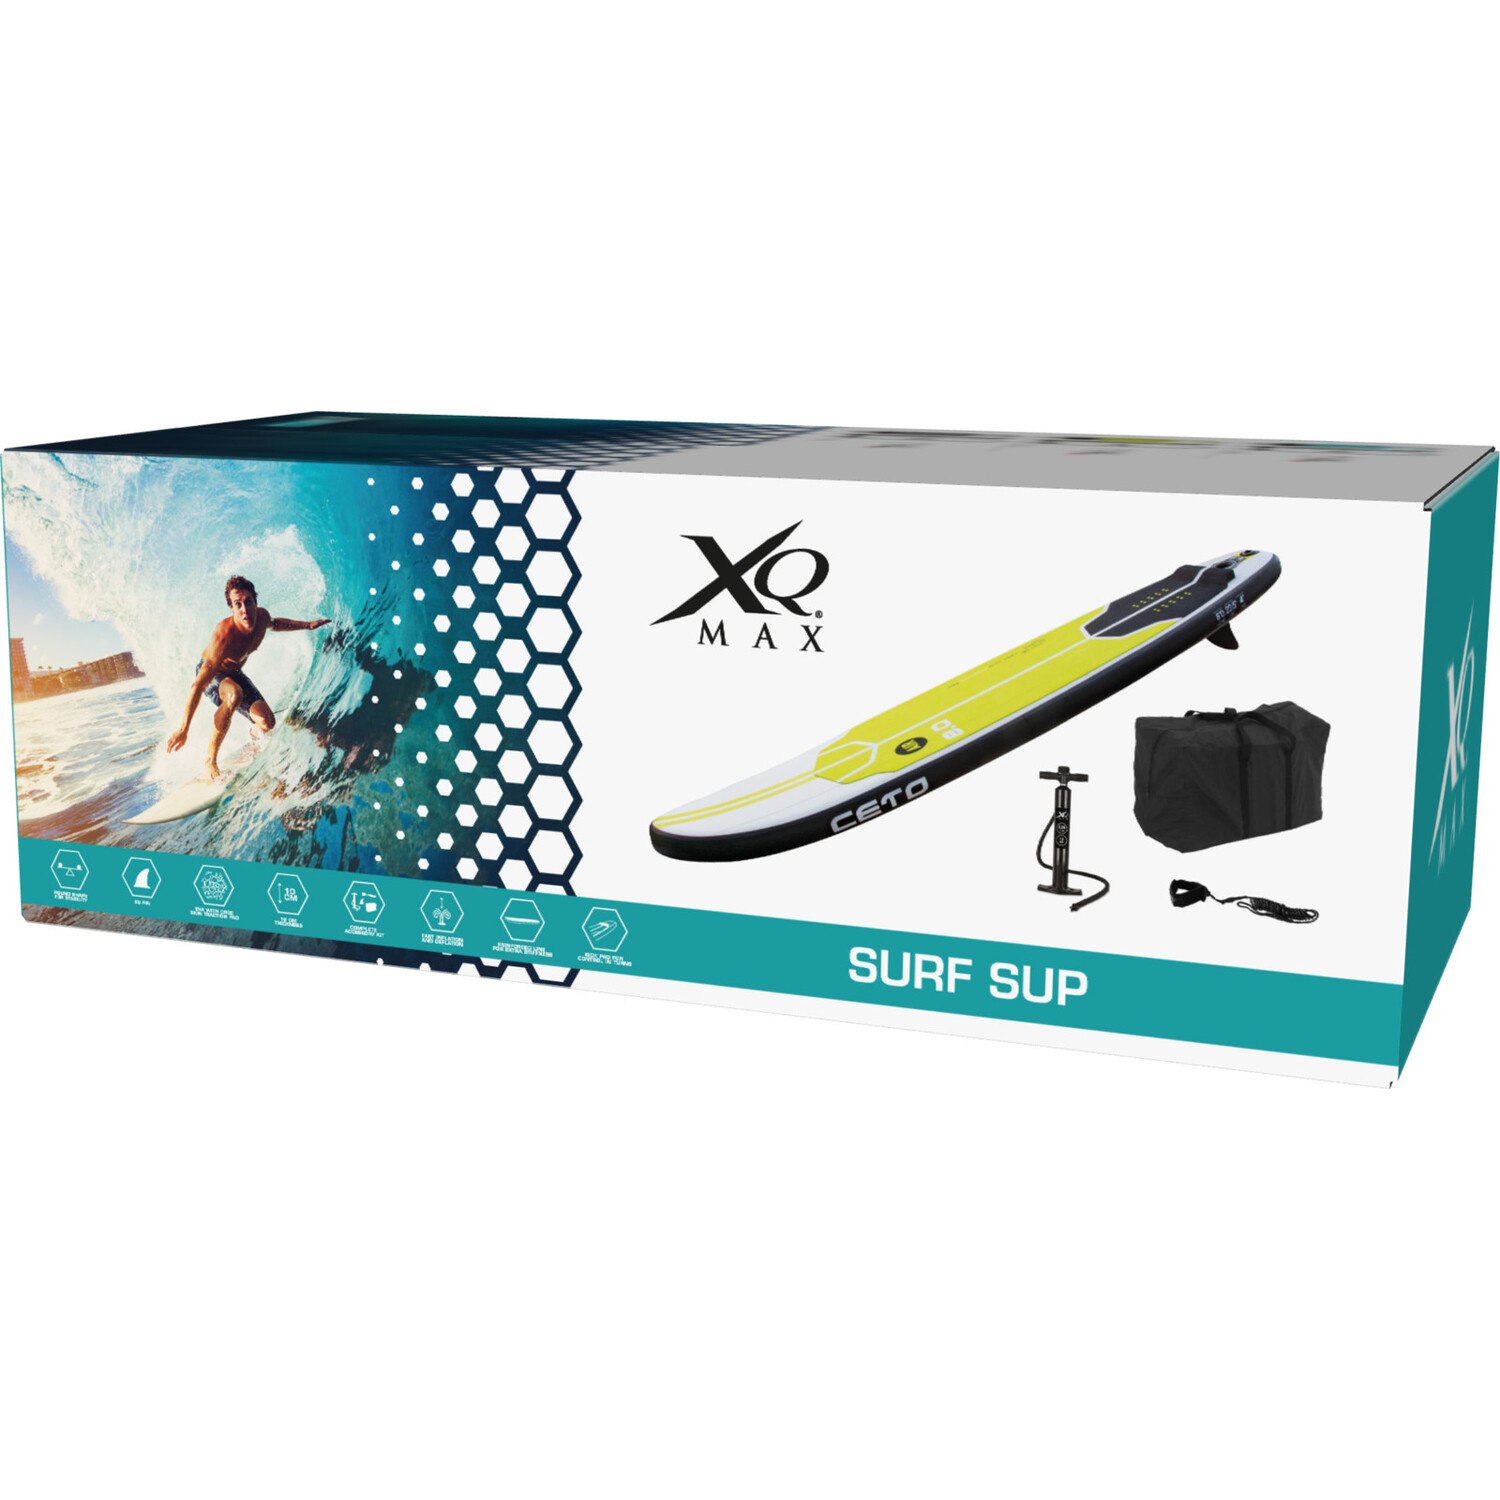 XQMAX 245 Surf Paddle Board - Lime Image 3